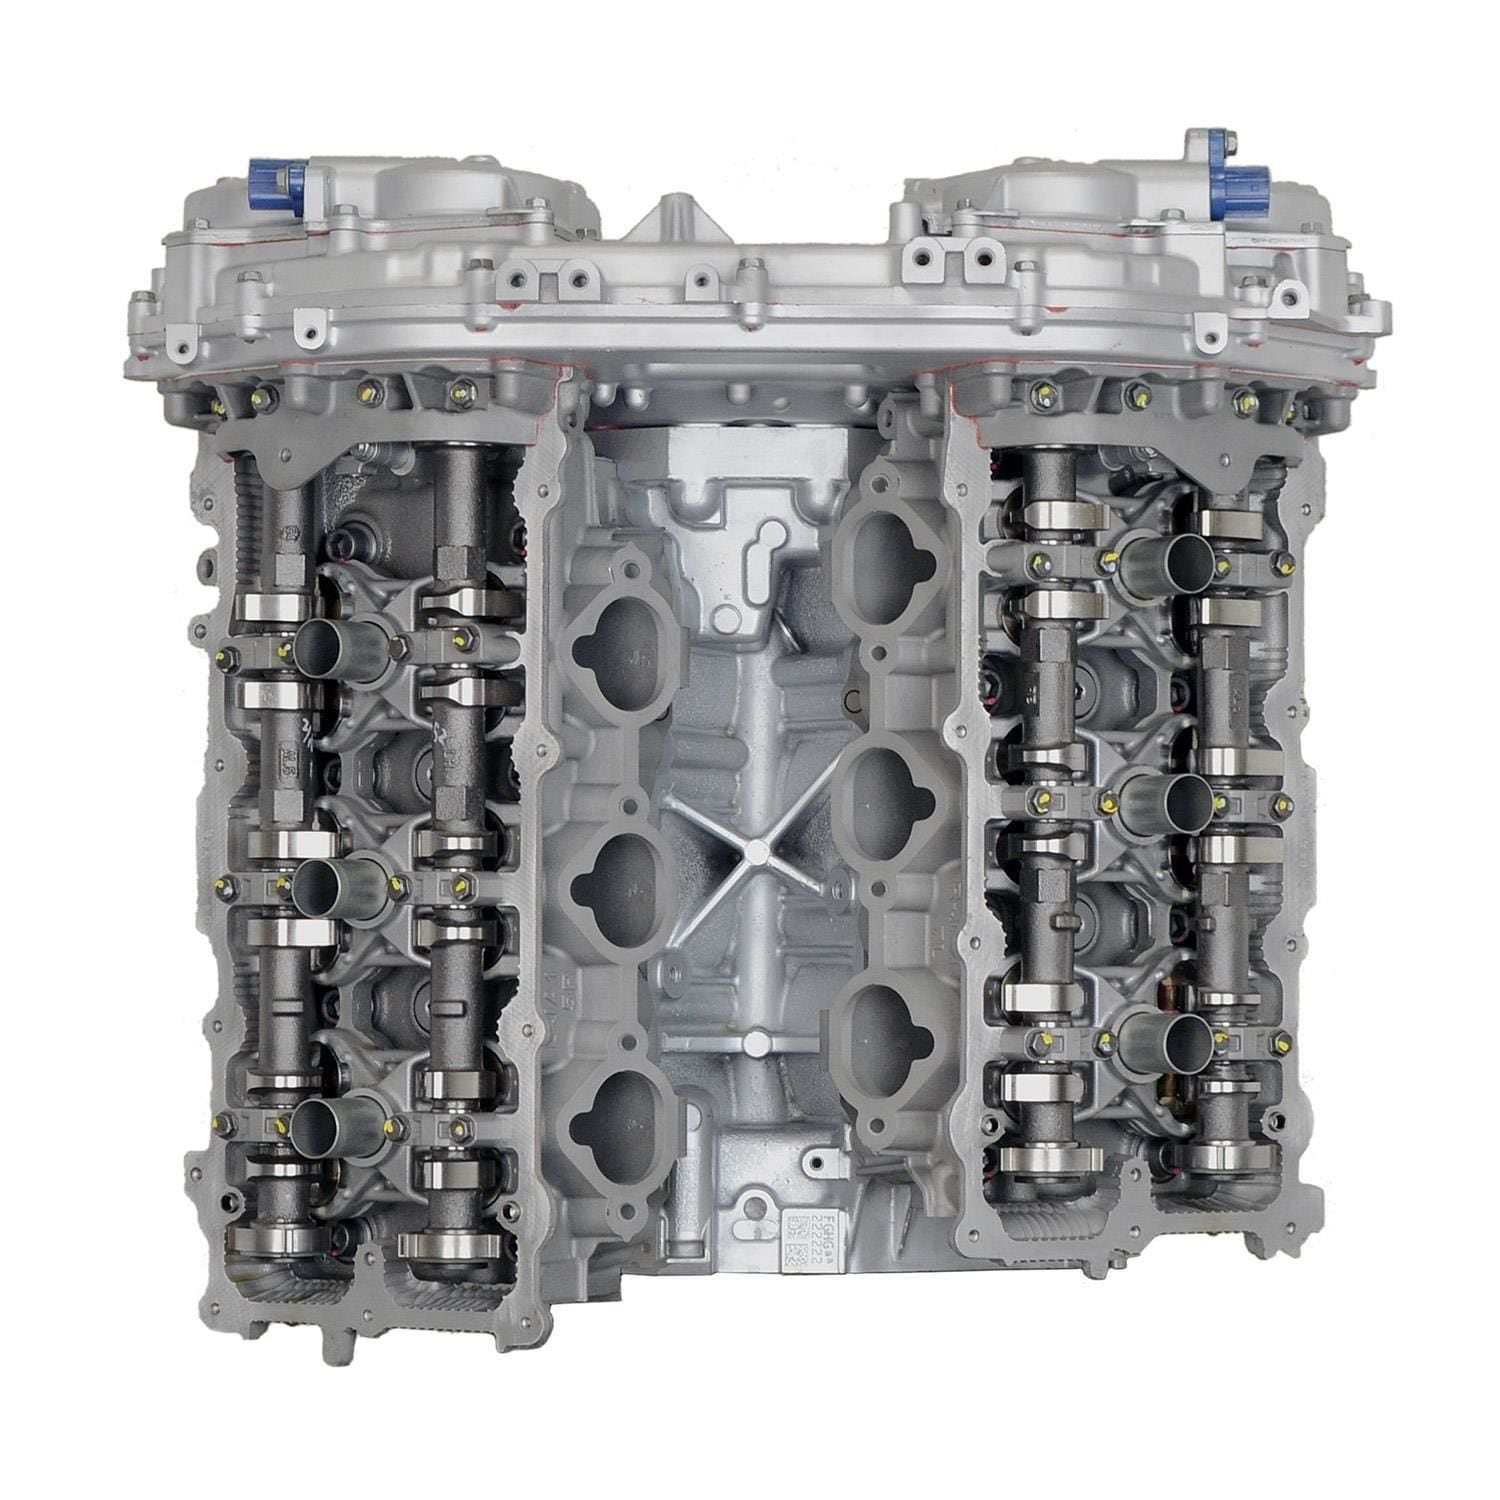 NuTech Remanufactured Long Block Engine 352